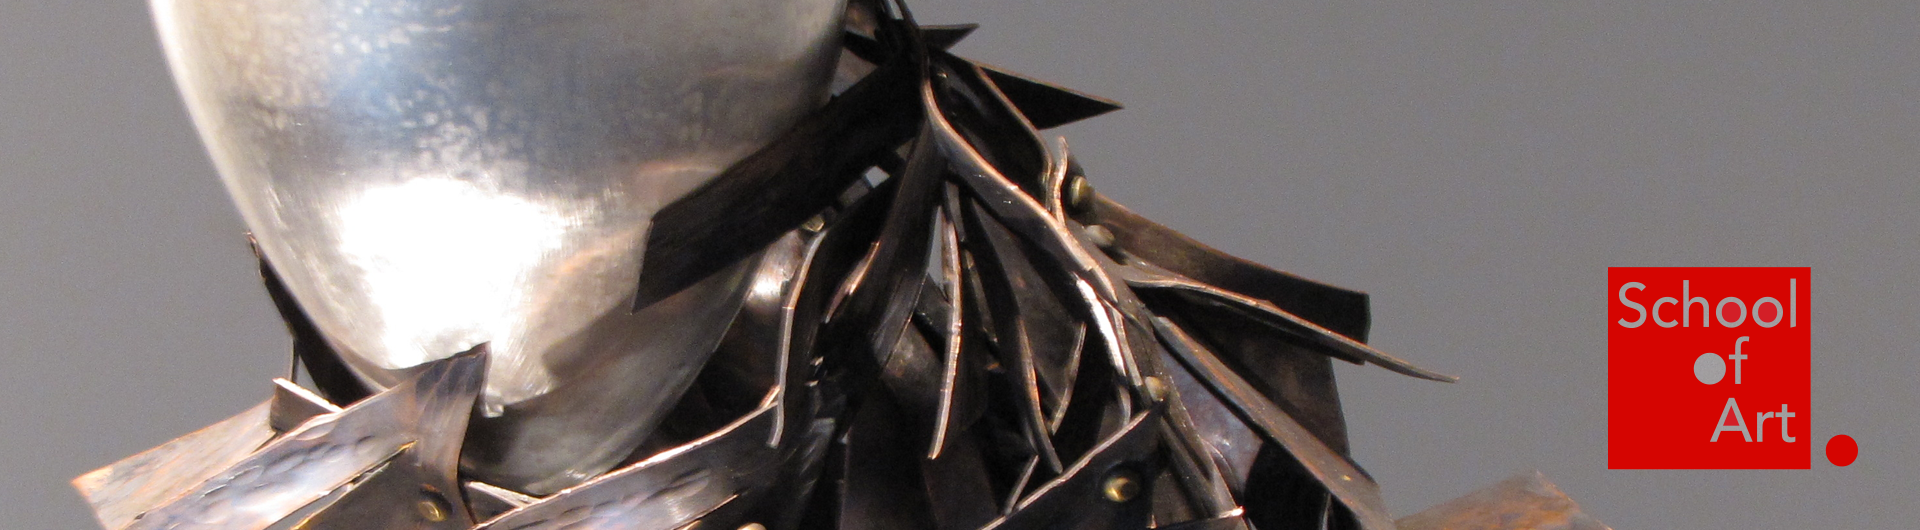 Extreme closeup of metal sculpture on display in a gallery